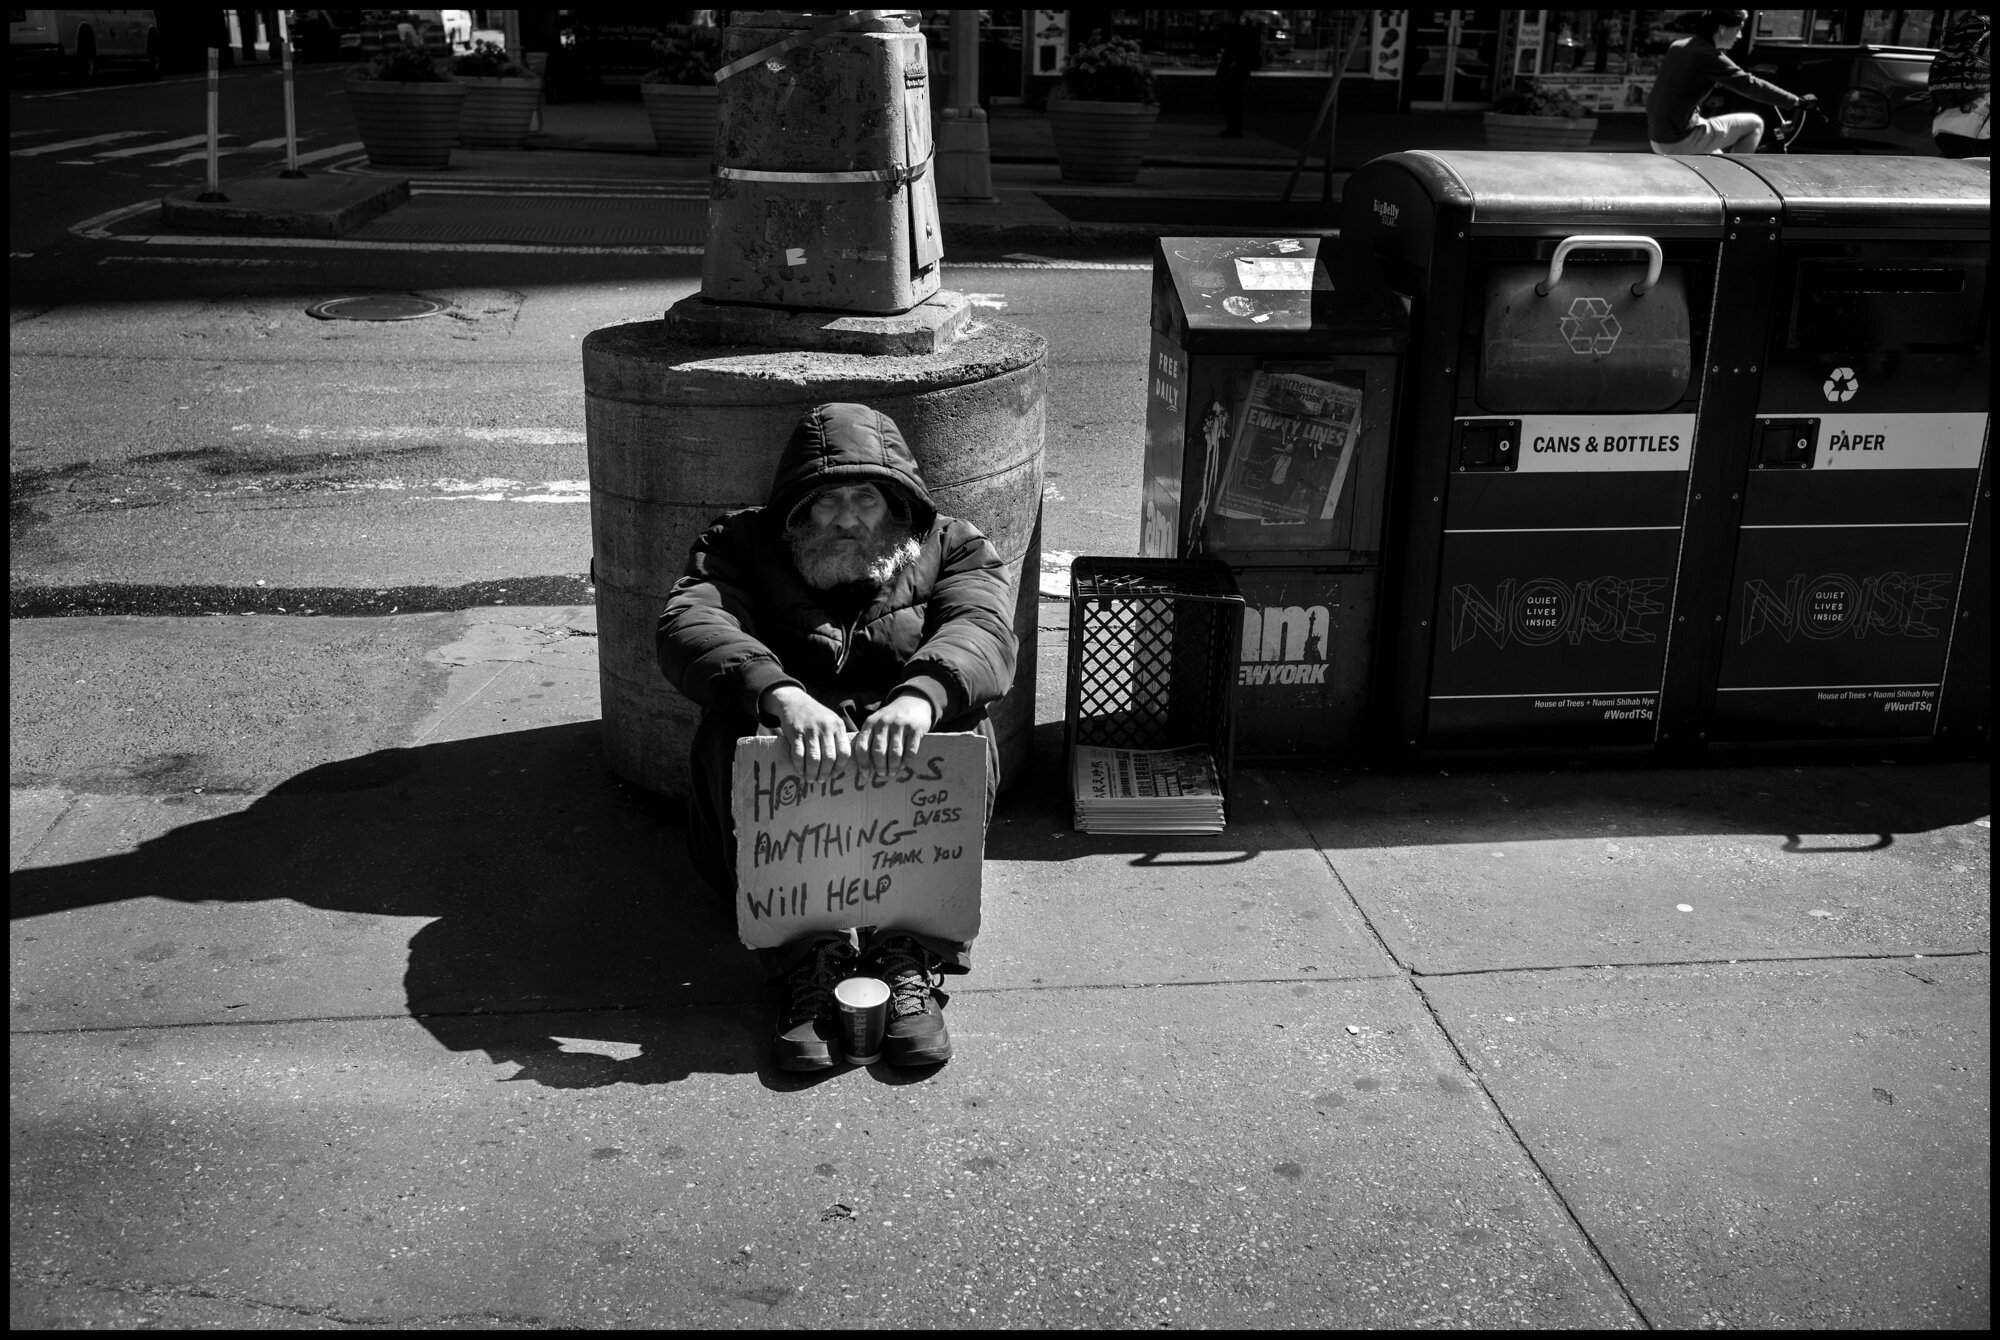  A homeless man sits near Times Square.  March 20, 2020. © Peter Turnley.   ID# 01-016 